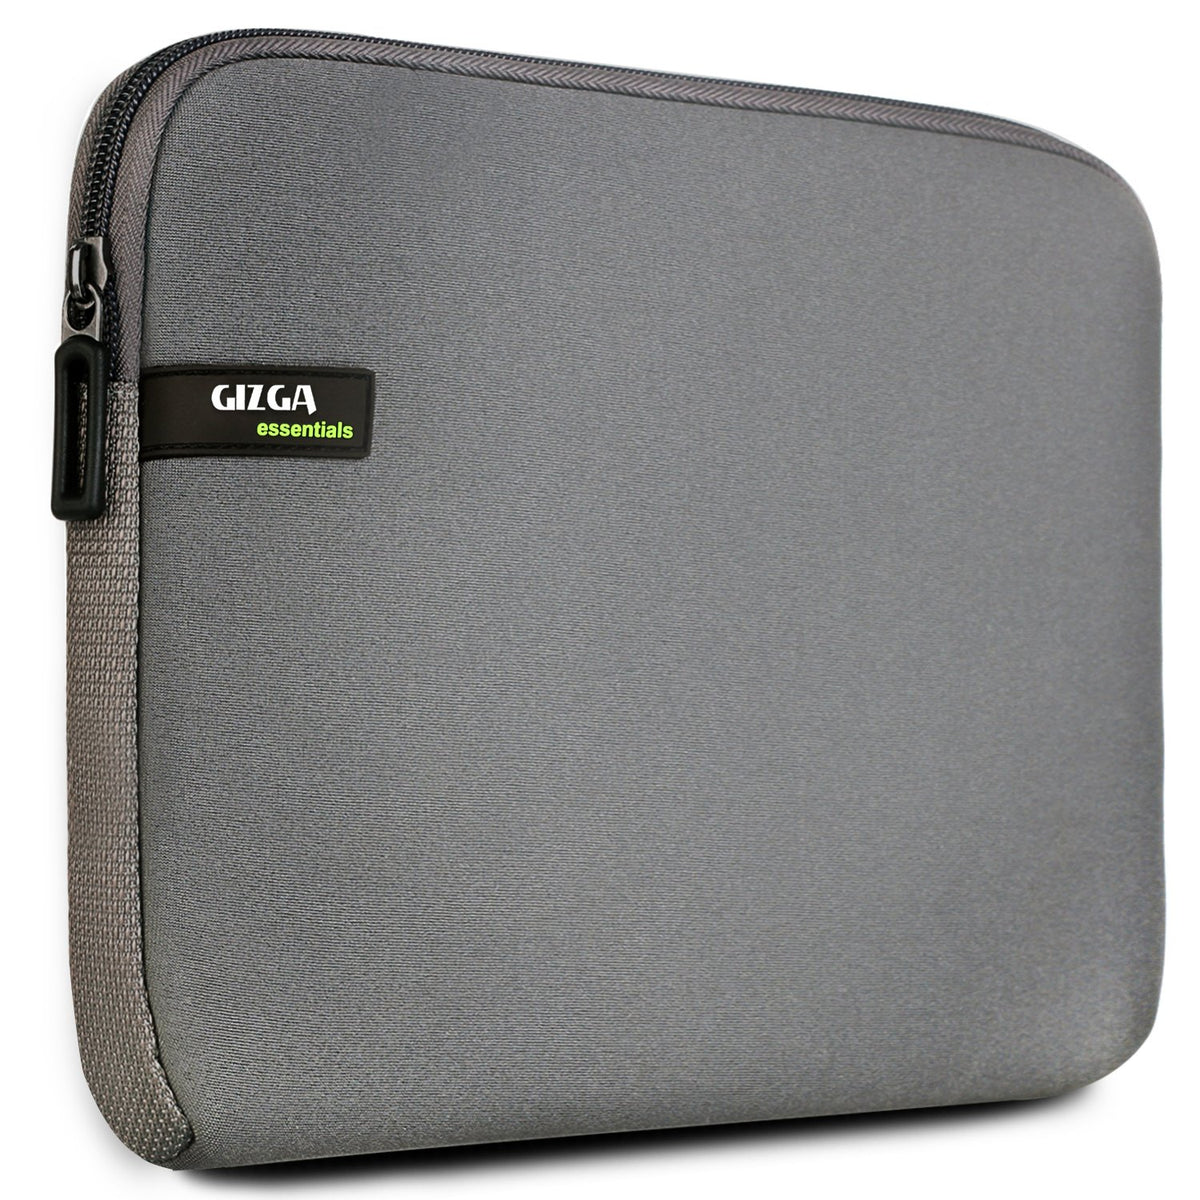 Laptop Bag Sleeve Case Cover Pouch for 13.3 Inch Laptops - Grey